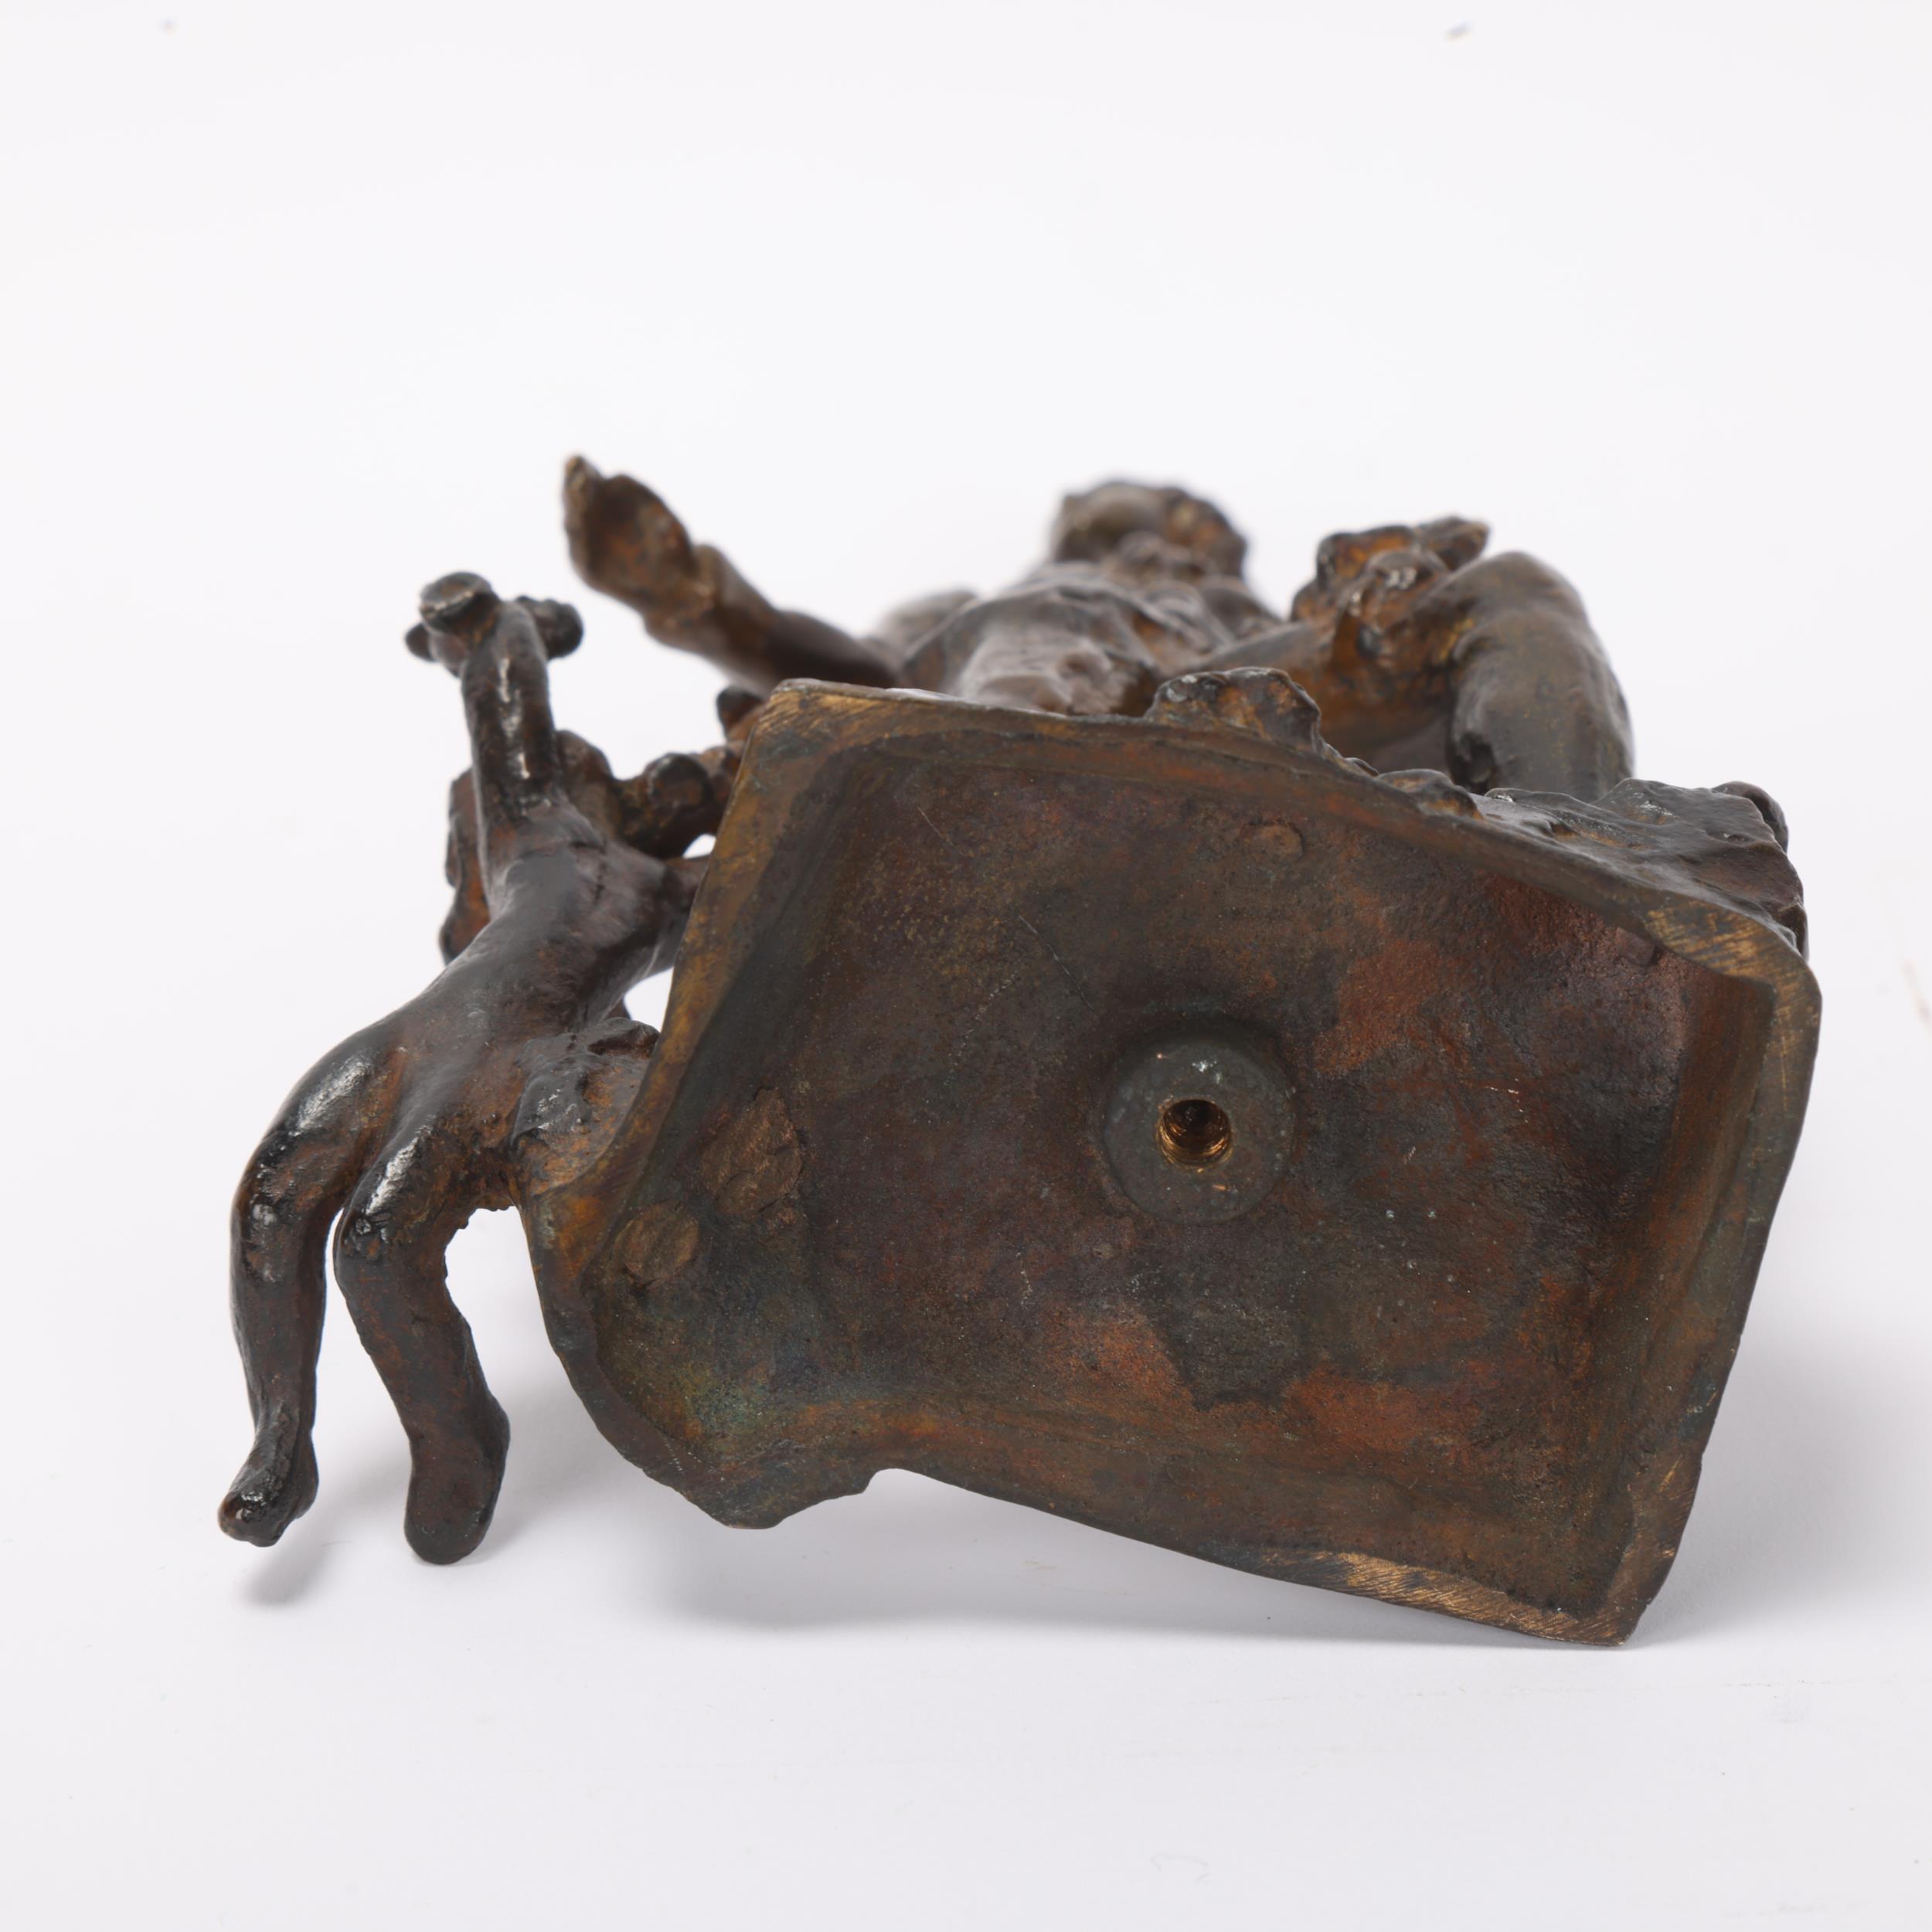 Carl Johan Eldh (1873 - 1954), man and cherub, patinated bronze sculpture, signed on base, dated - Image 3 of 3